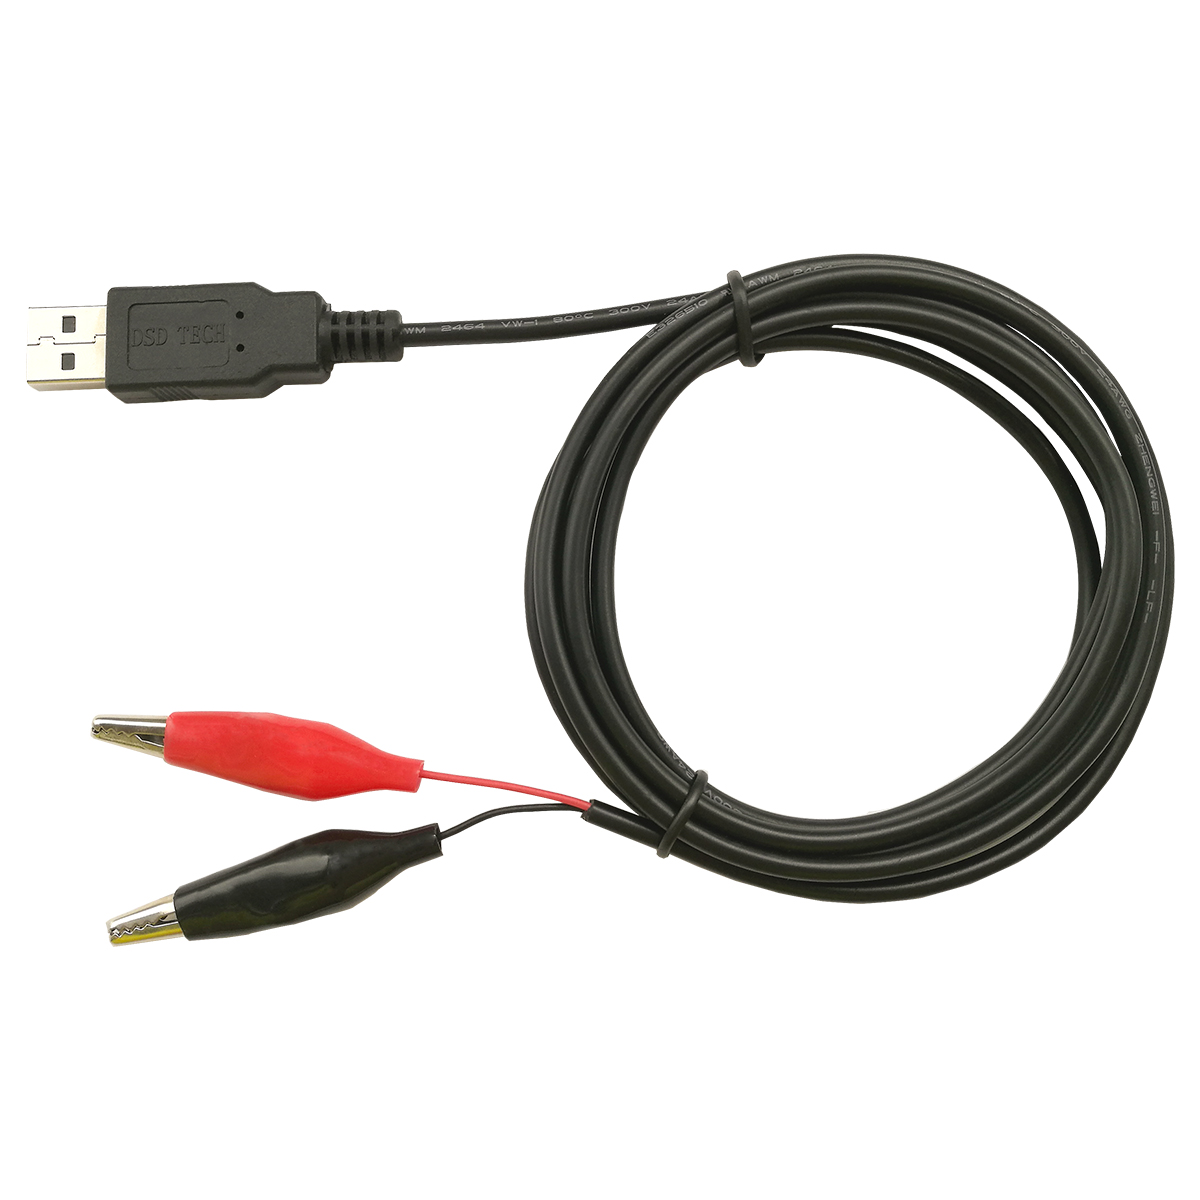 SH-U13 USB to RS485 Cable